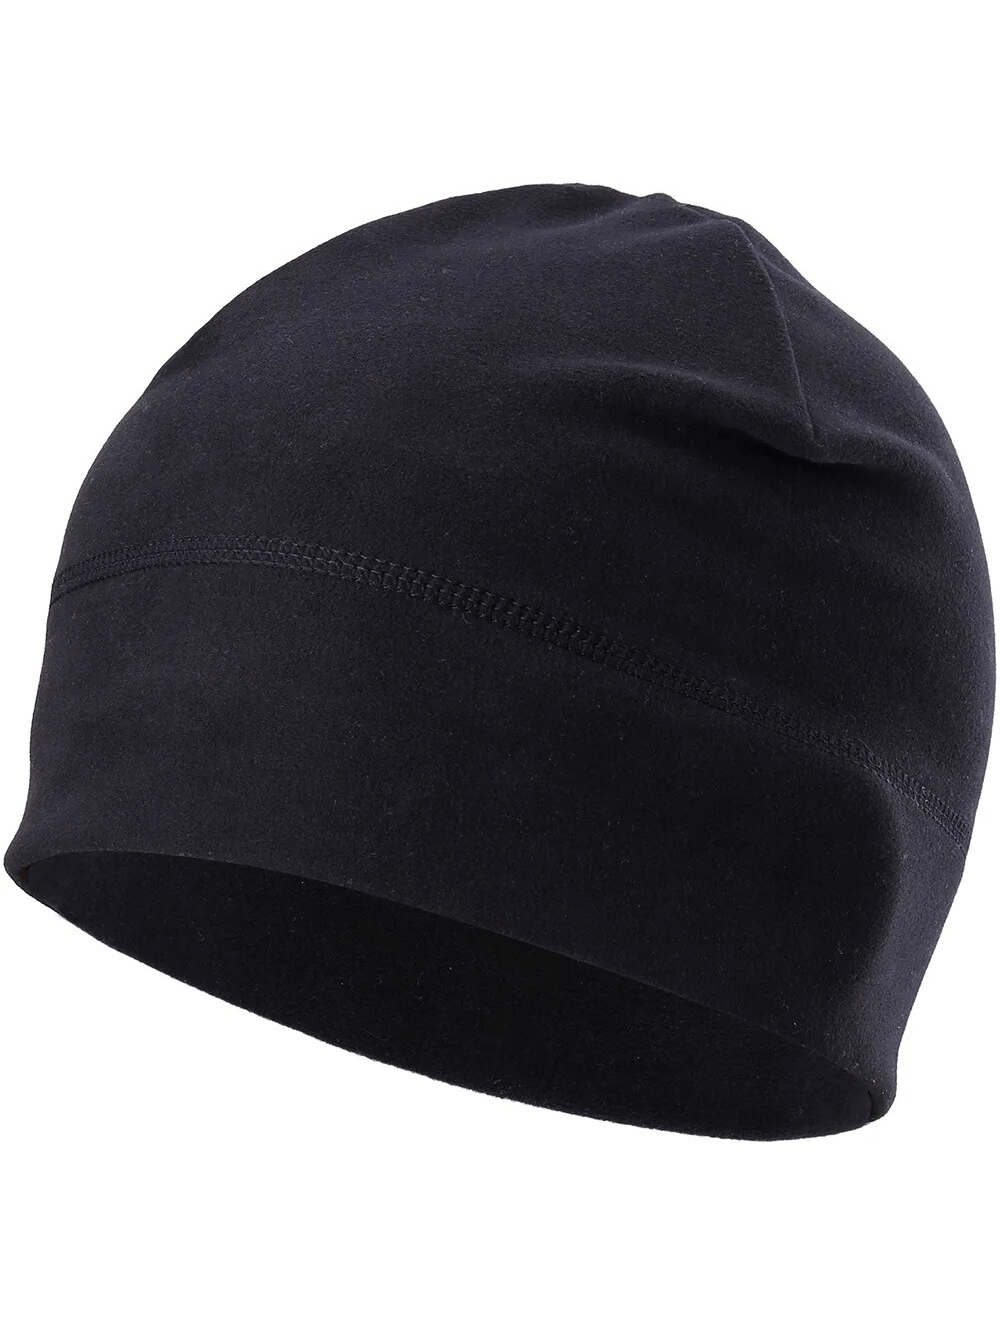 Windproof Fleece Beanies for Bicycle Sports Tennis Fitness - SF1659